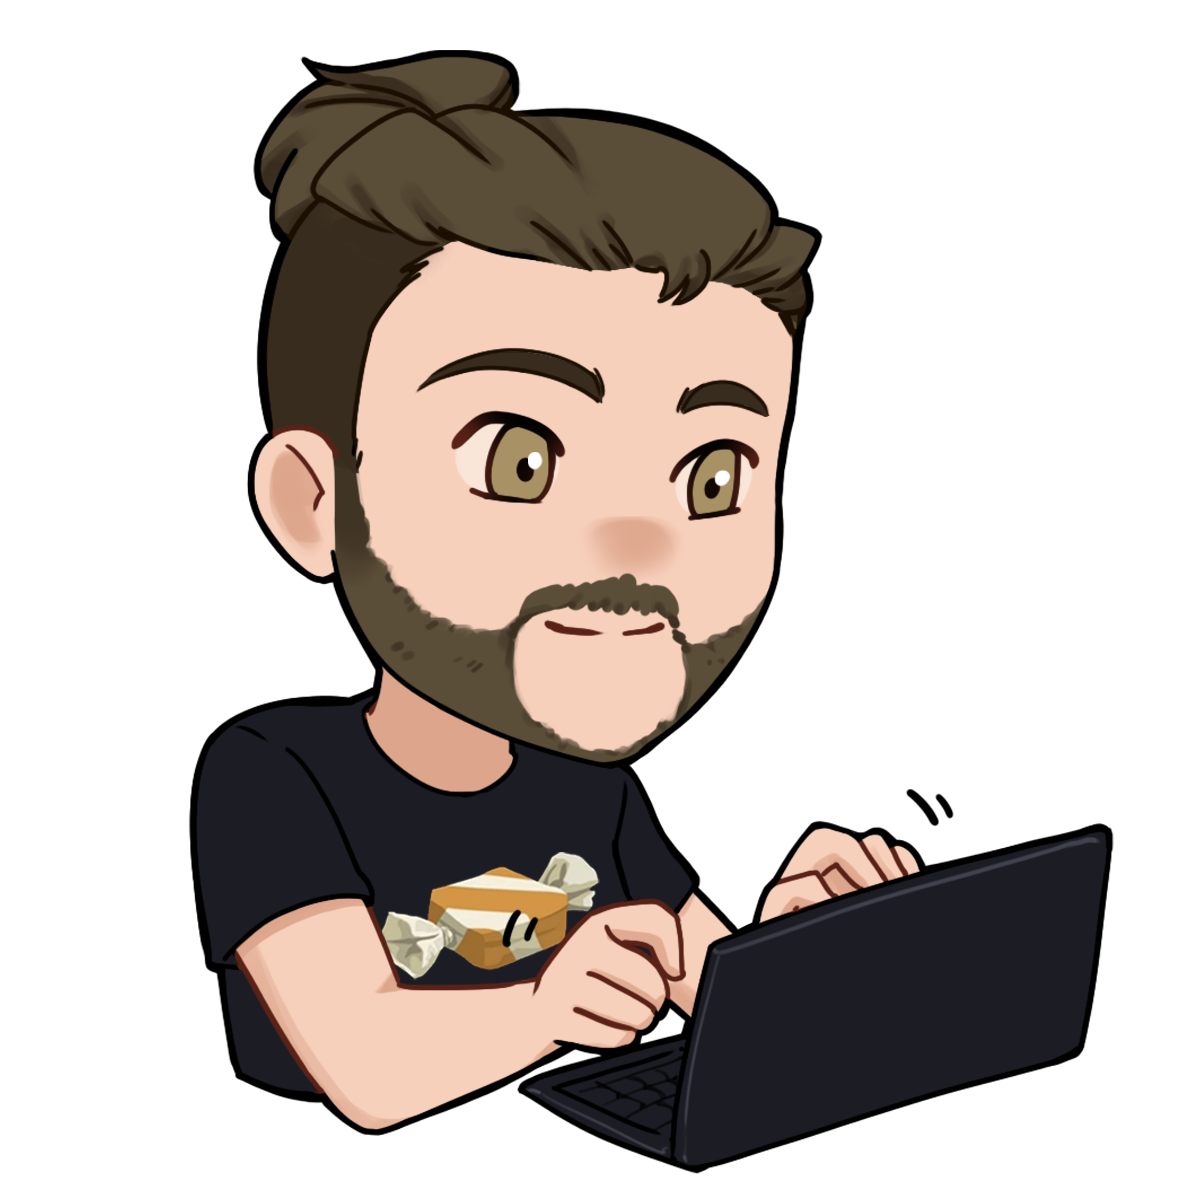 A chibi illustration of me (Leandro), wearing a black t-shirt with the Caramel Lang logo on it, while typing away on what looks like a Lenovo ThinkPad (which I do not really use!)